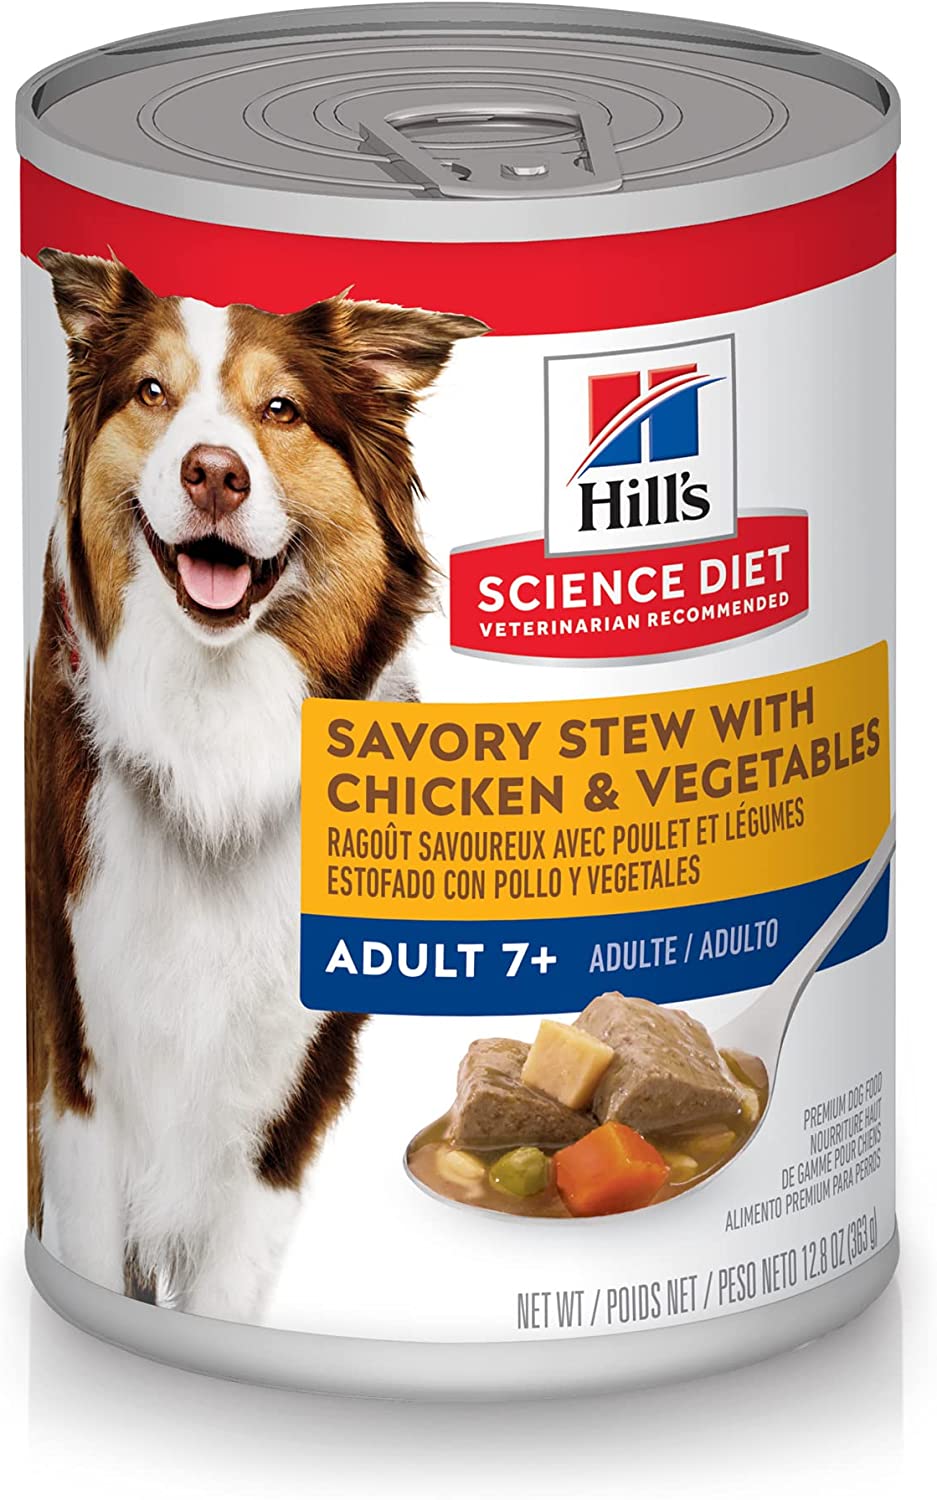 Hill's Science Diet Senior Wet Dog Food, Adult 7+ Savory Stew Canned Dog Food